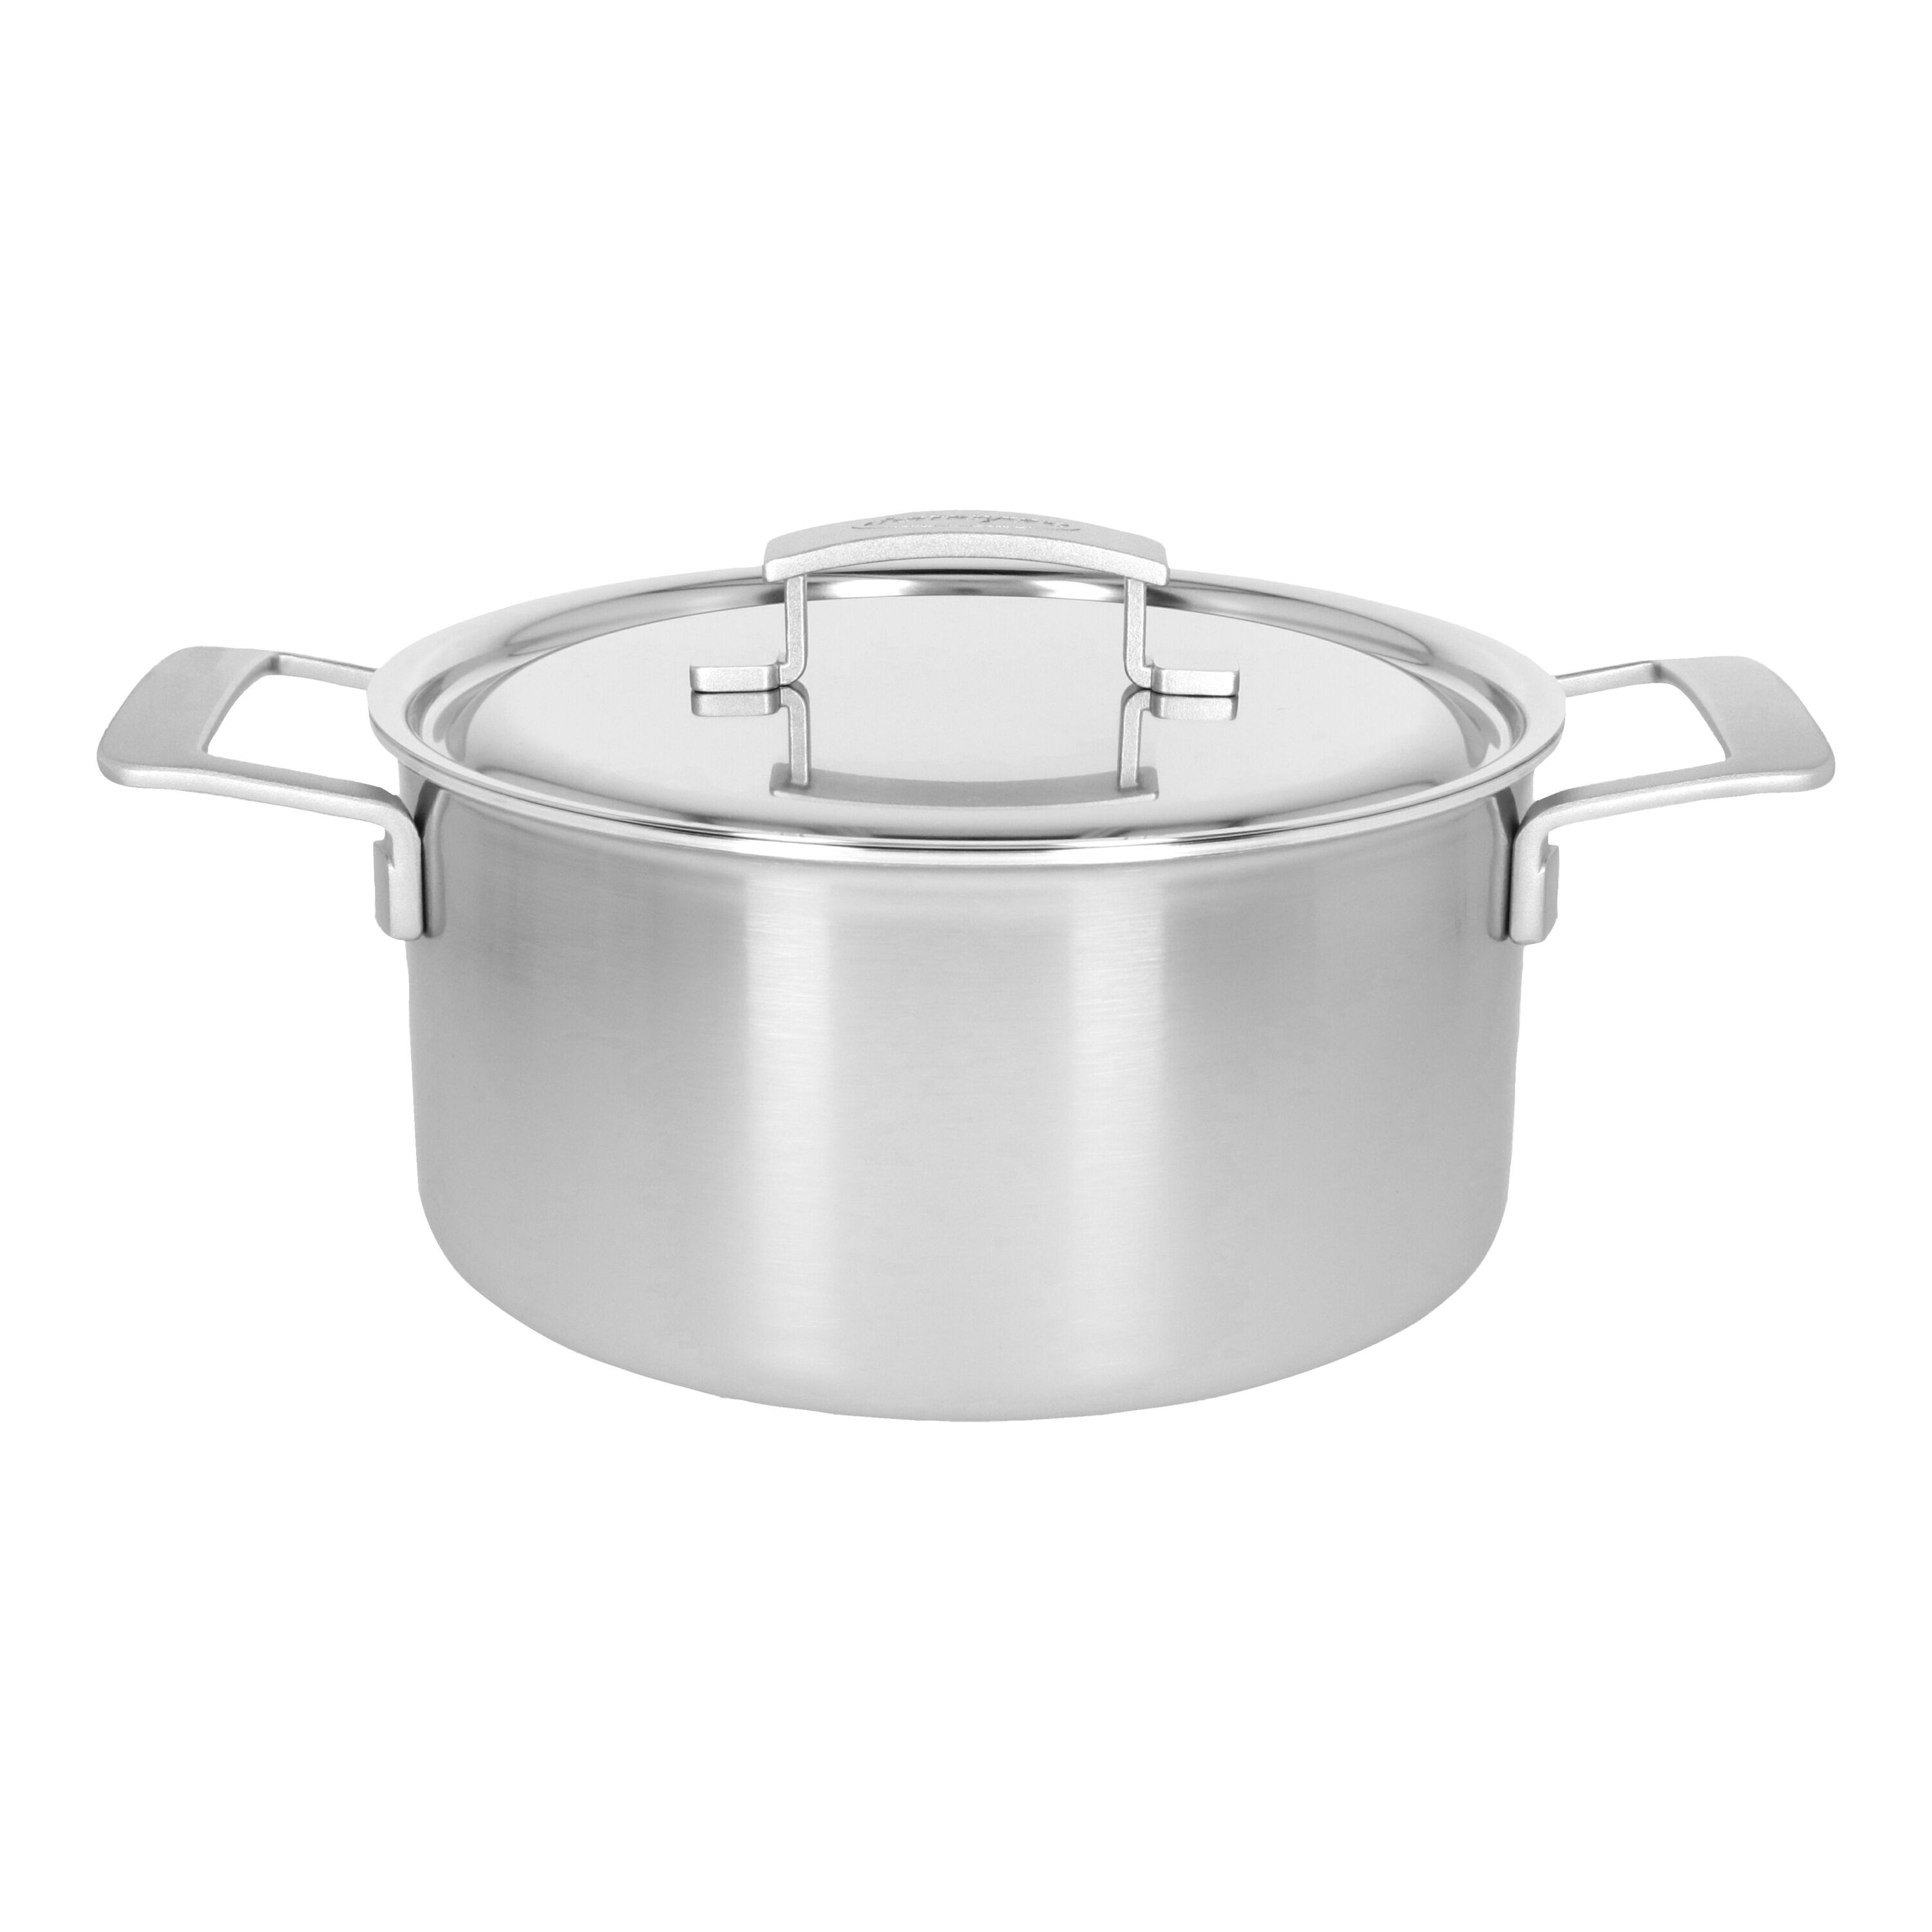 Frigidaire Ready-Cook 5 Quart Dutch Oven Stainless Steel with lid 